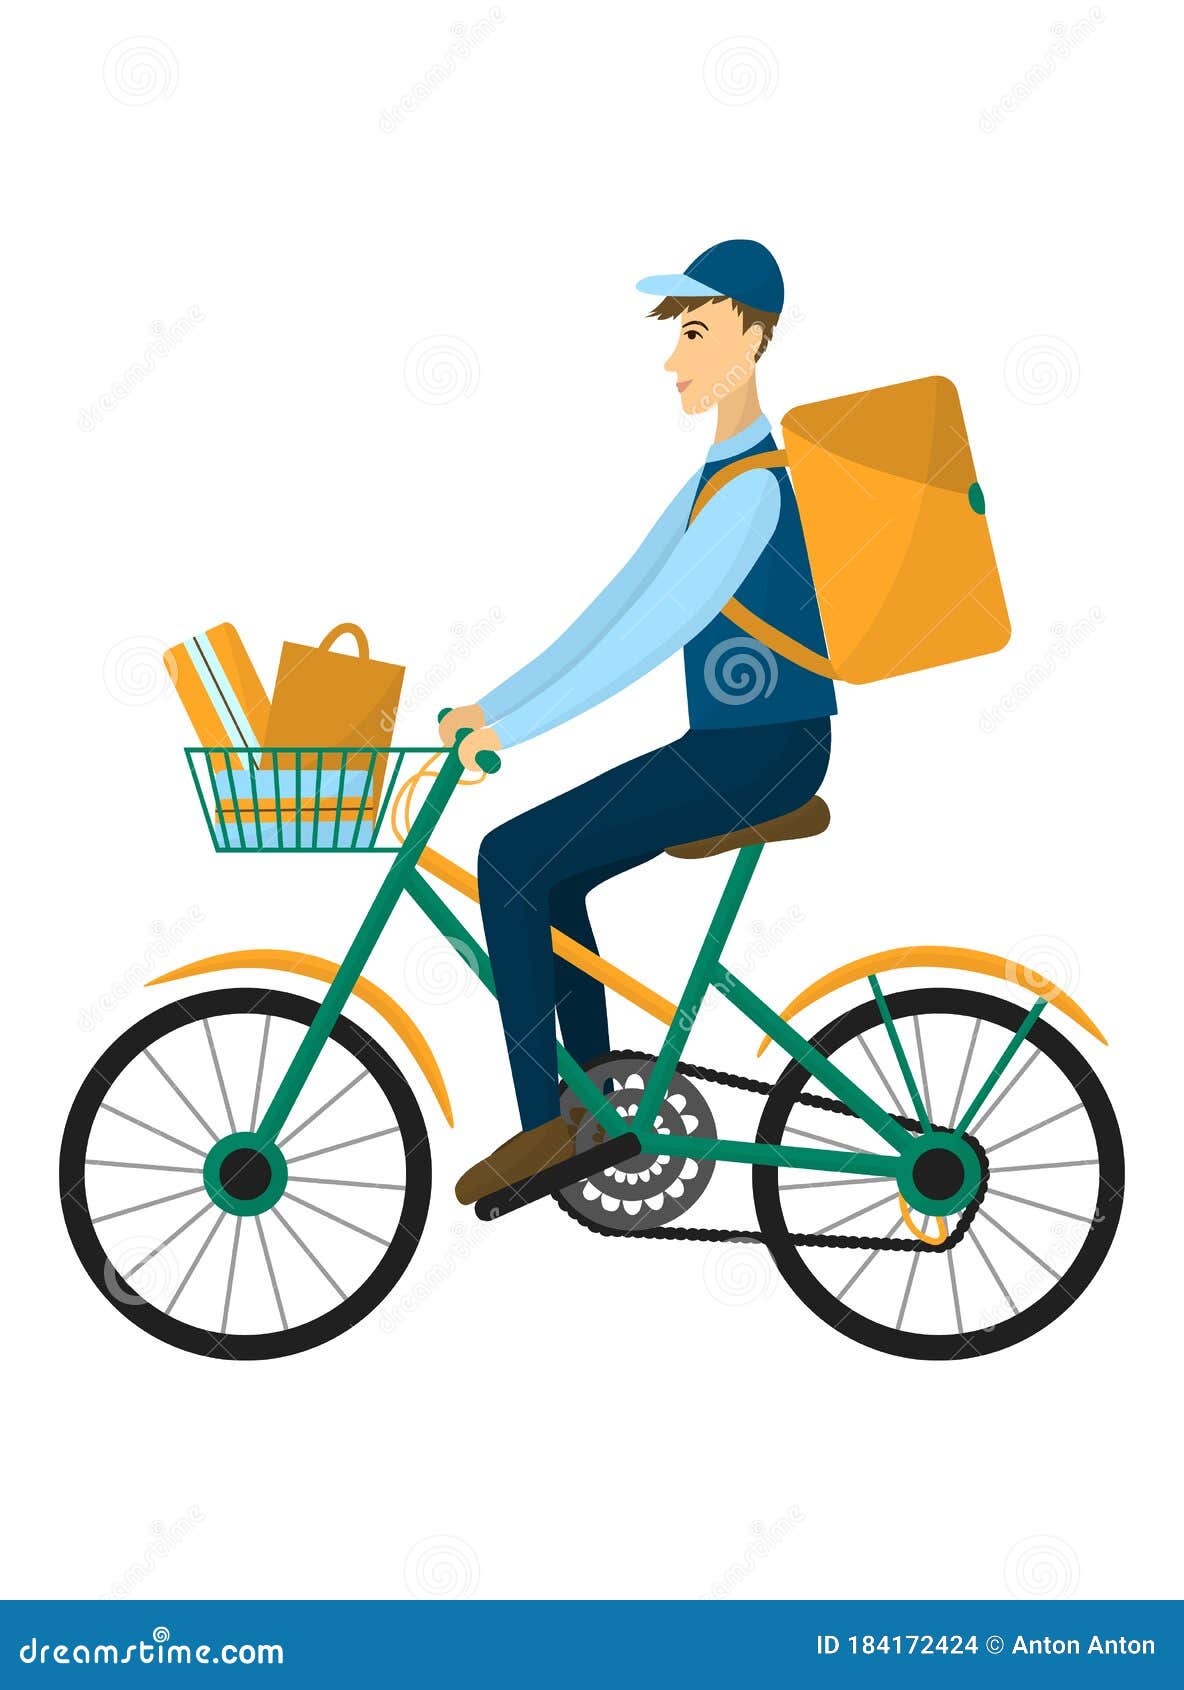 Vector Image of the Courier on the Bike